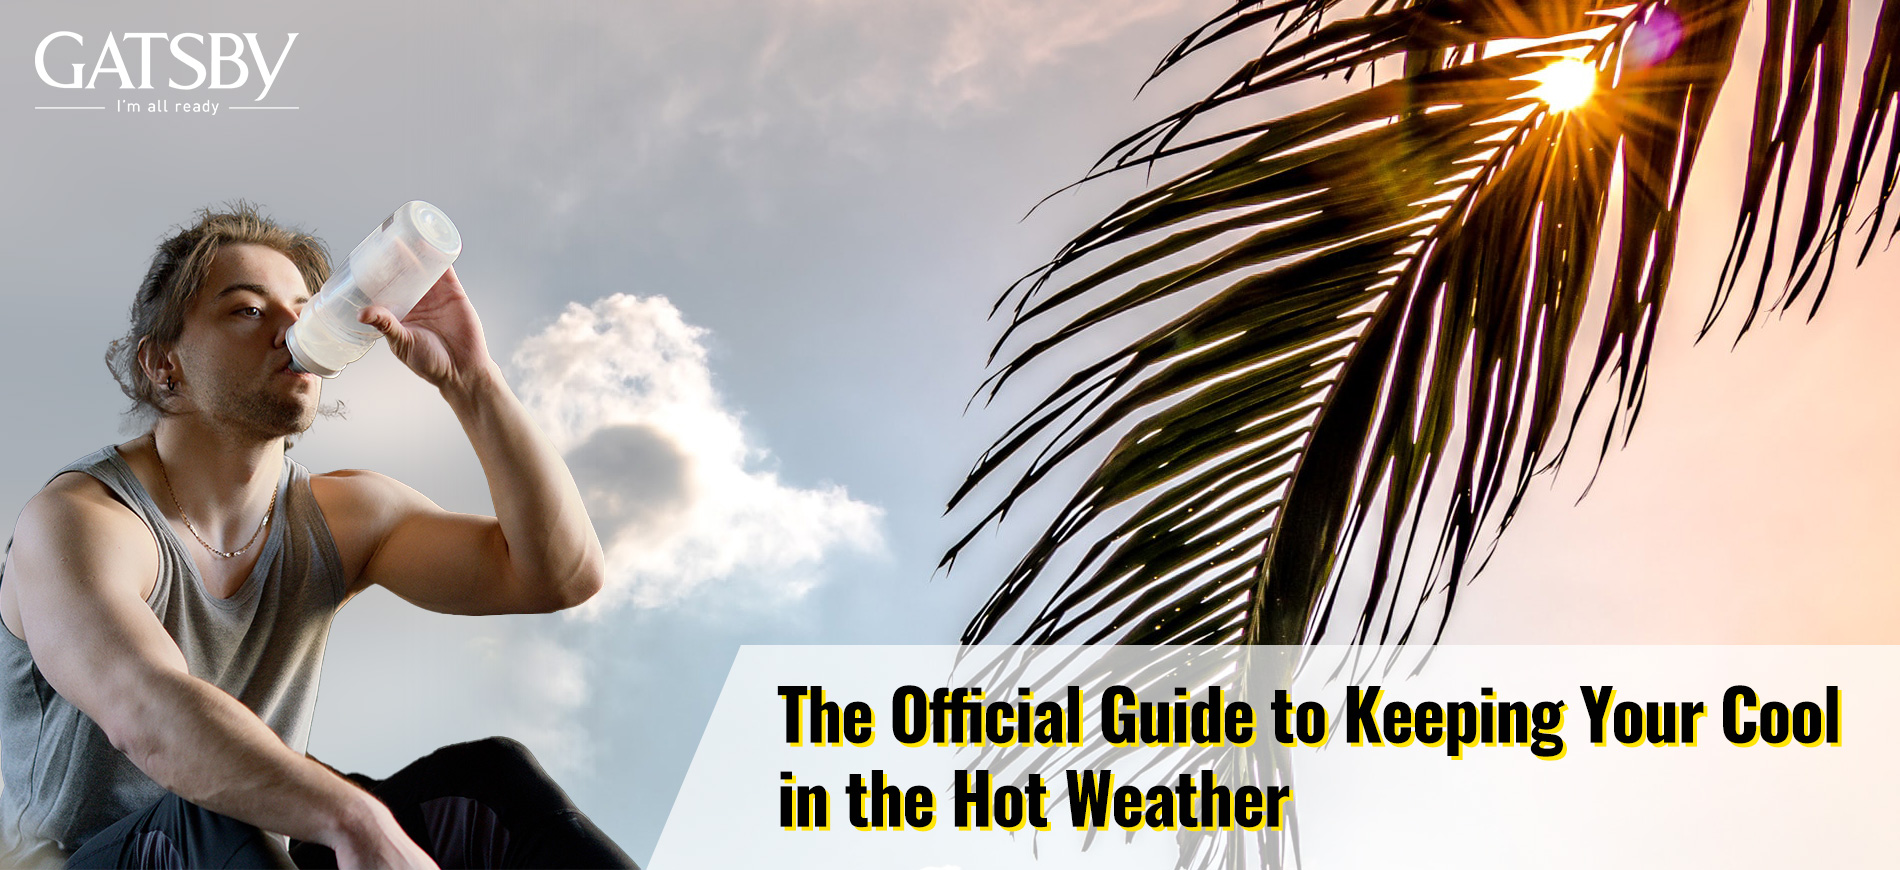 The Official Guide to Keeping Your Cool in Hot Weather: 10 Easy Tips